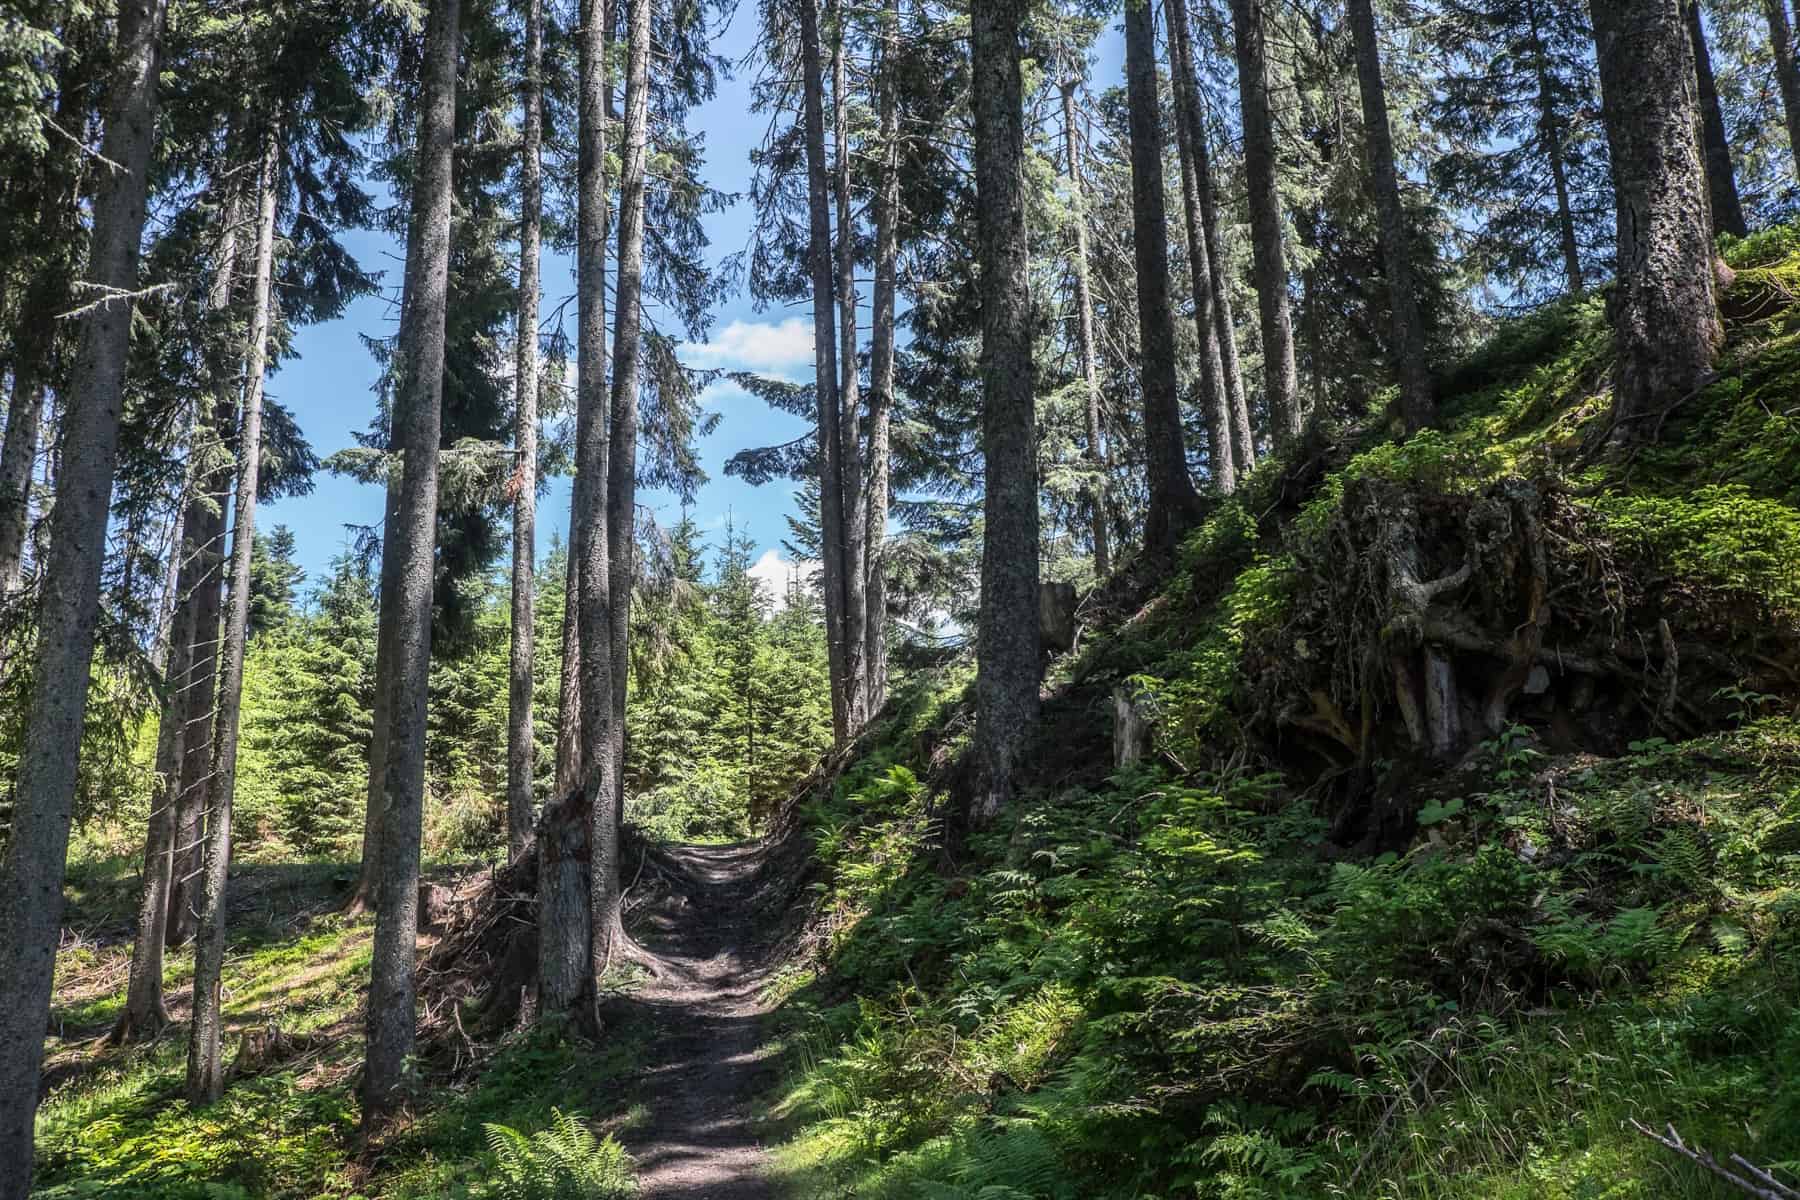 The deep forested hiking trails on Hochgründeck Mountain, covered in green and backed by a blue sky